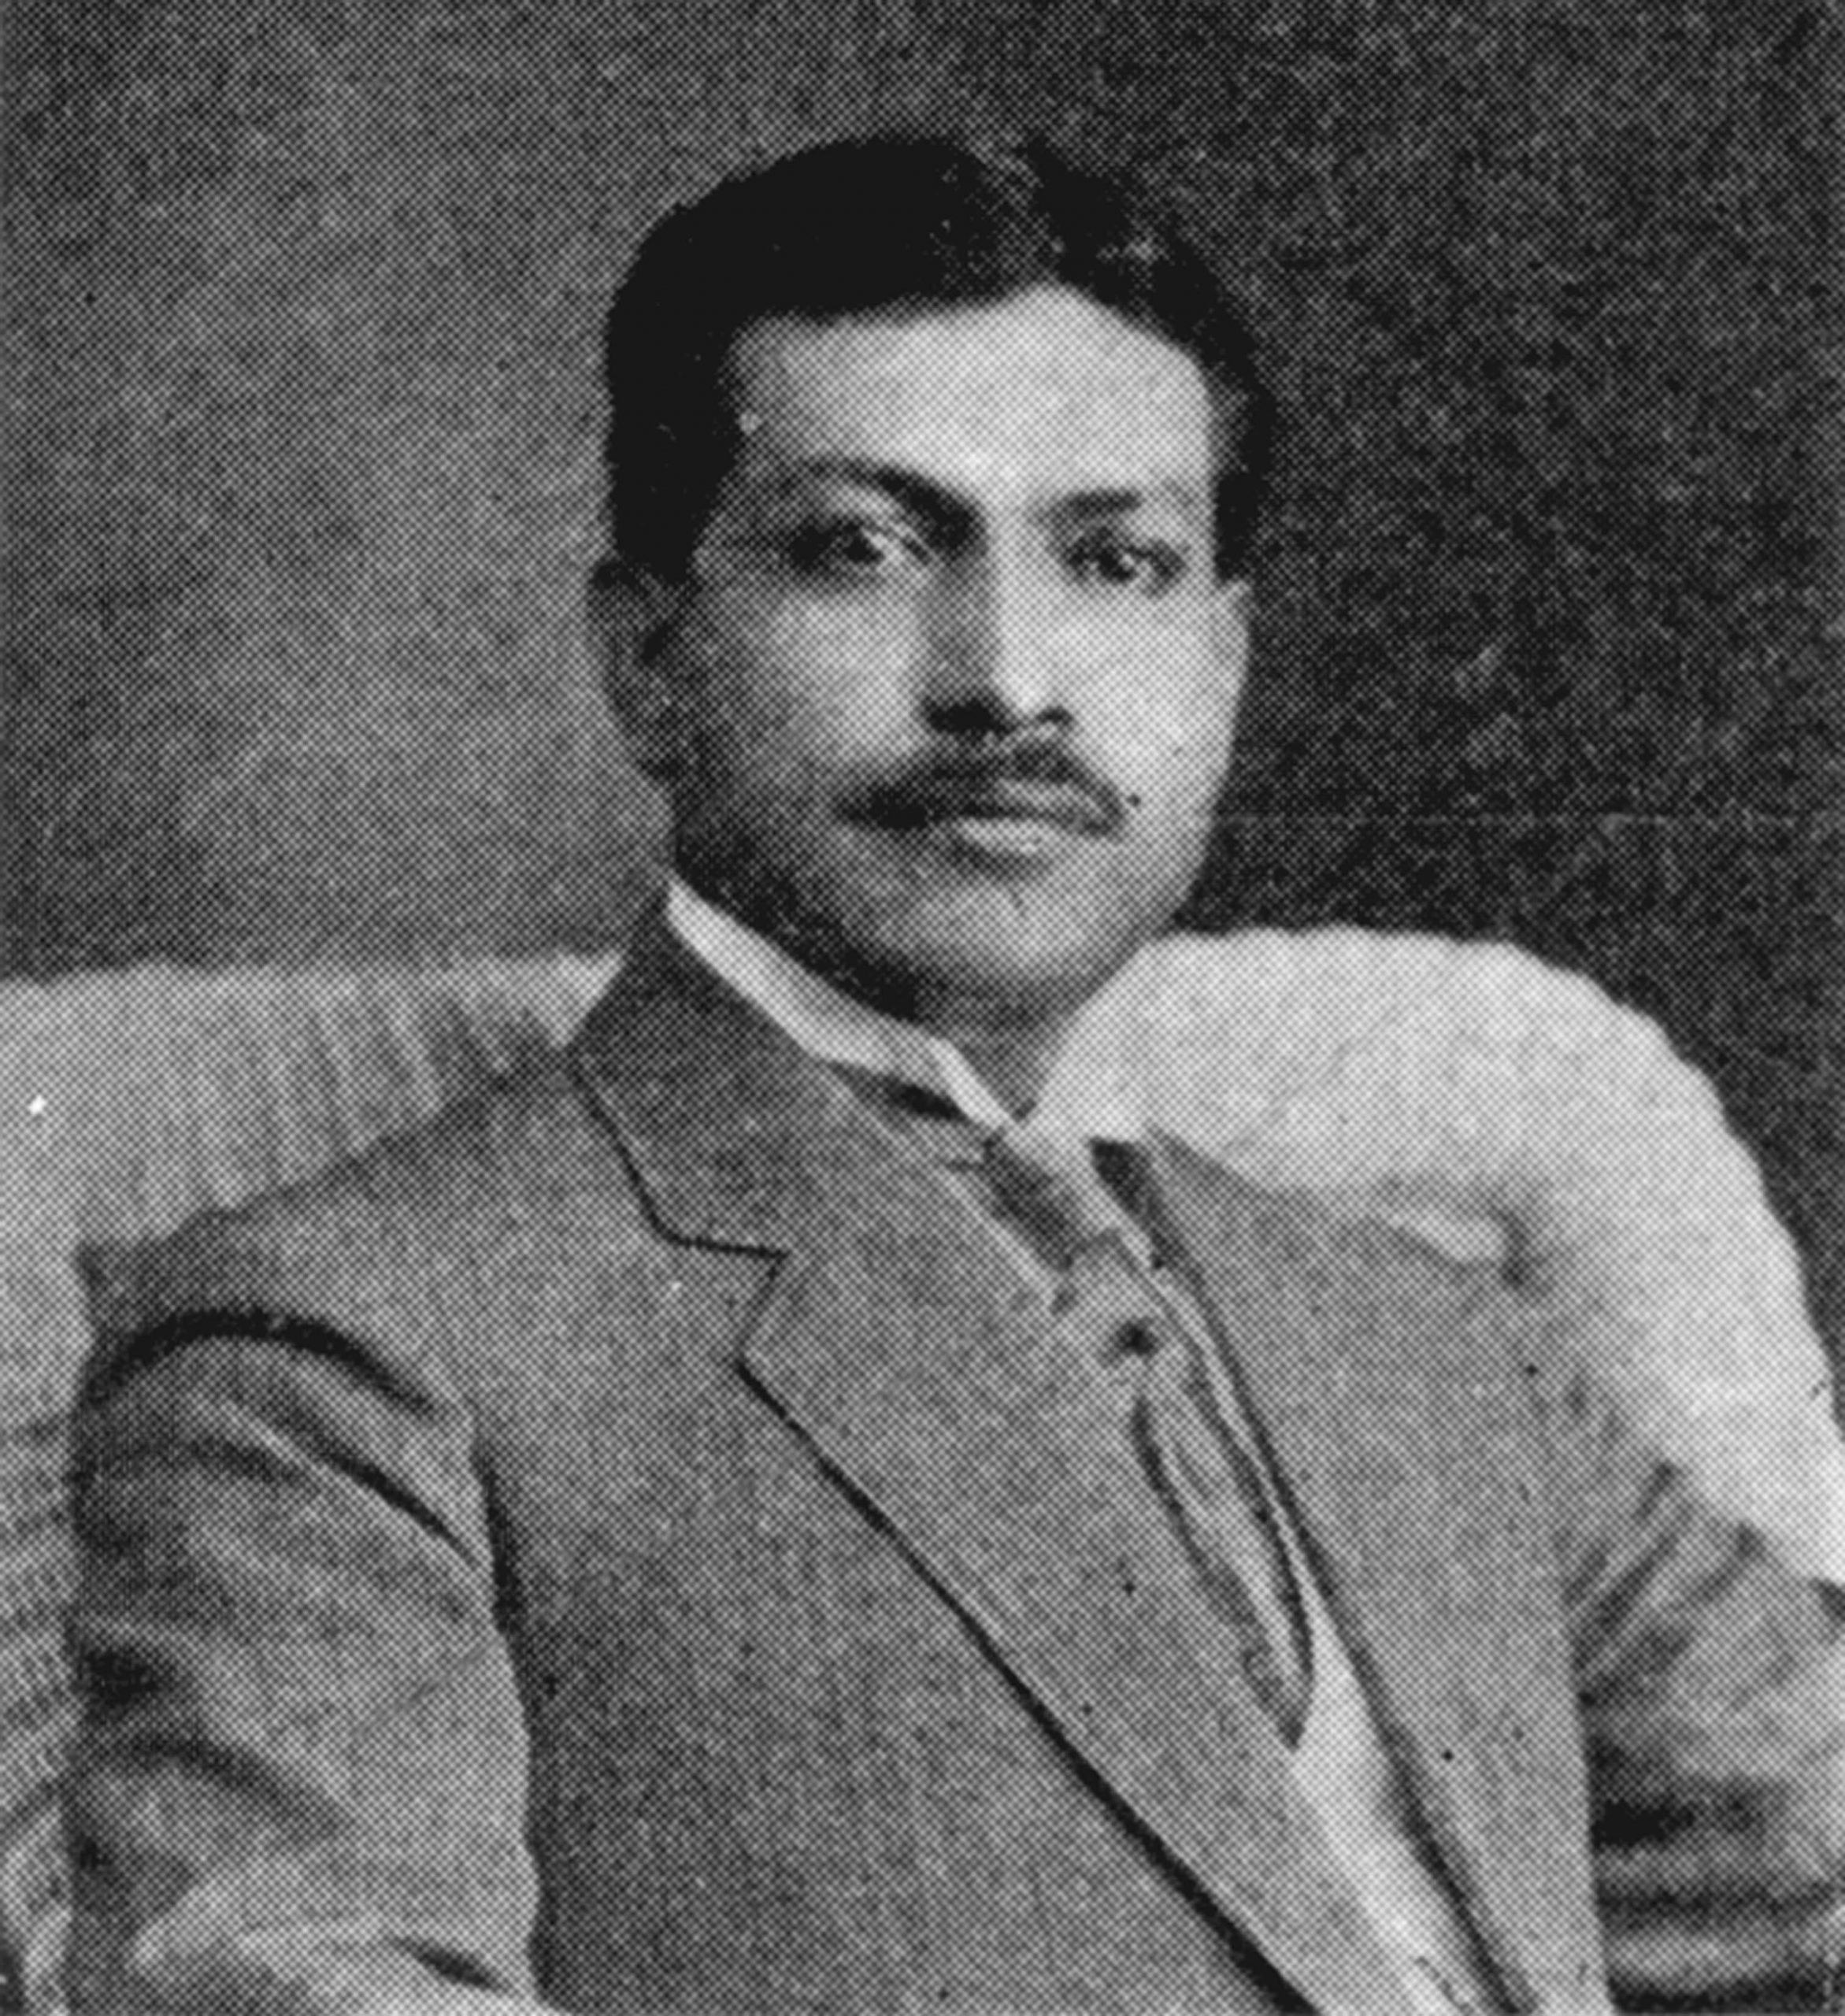 A black-and-white photo shows J. C. Ybarra in a suit sitting in a chair. He has dark hair and a mustache. Image link will enlarge image.